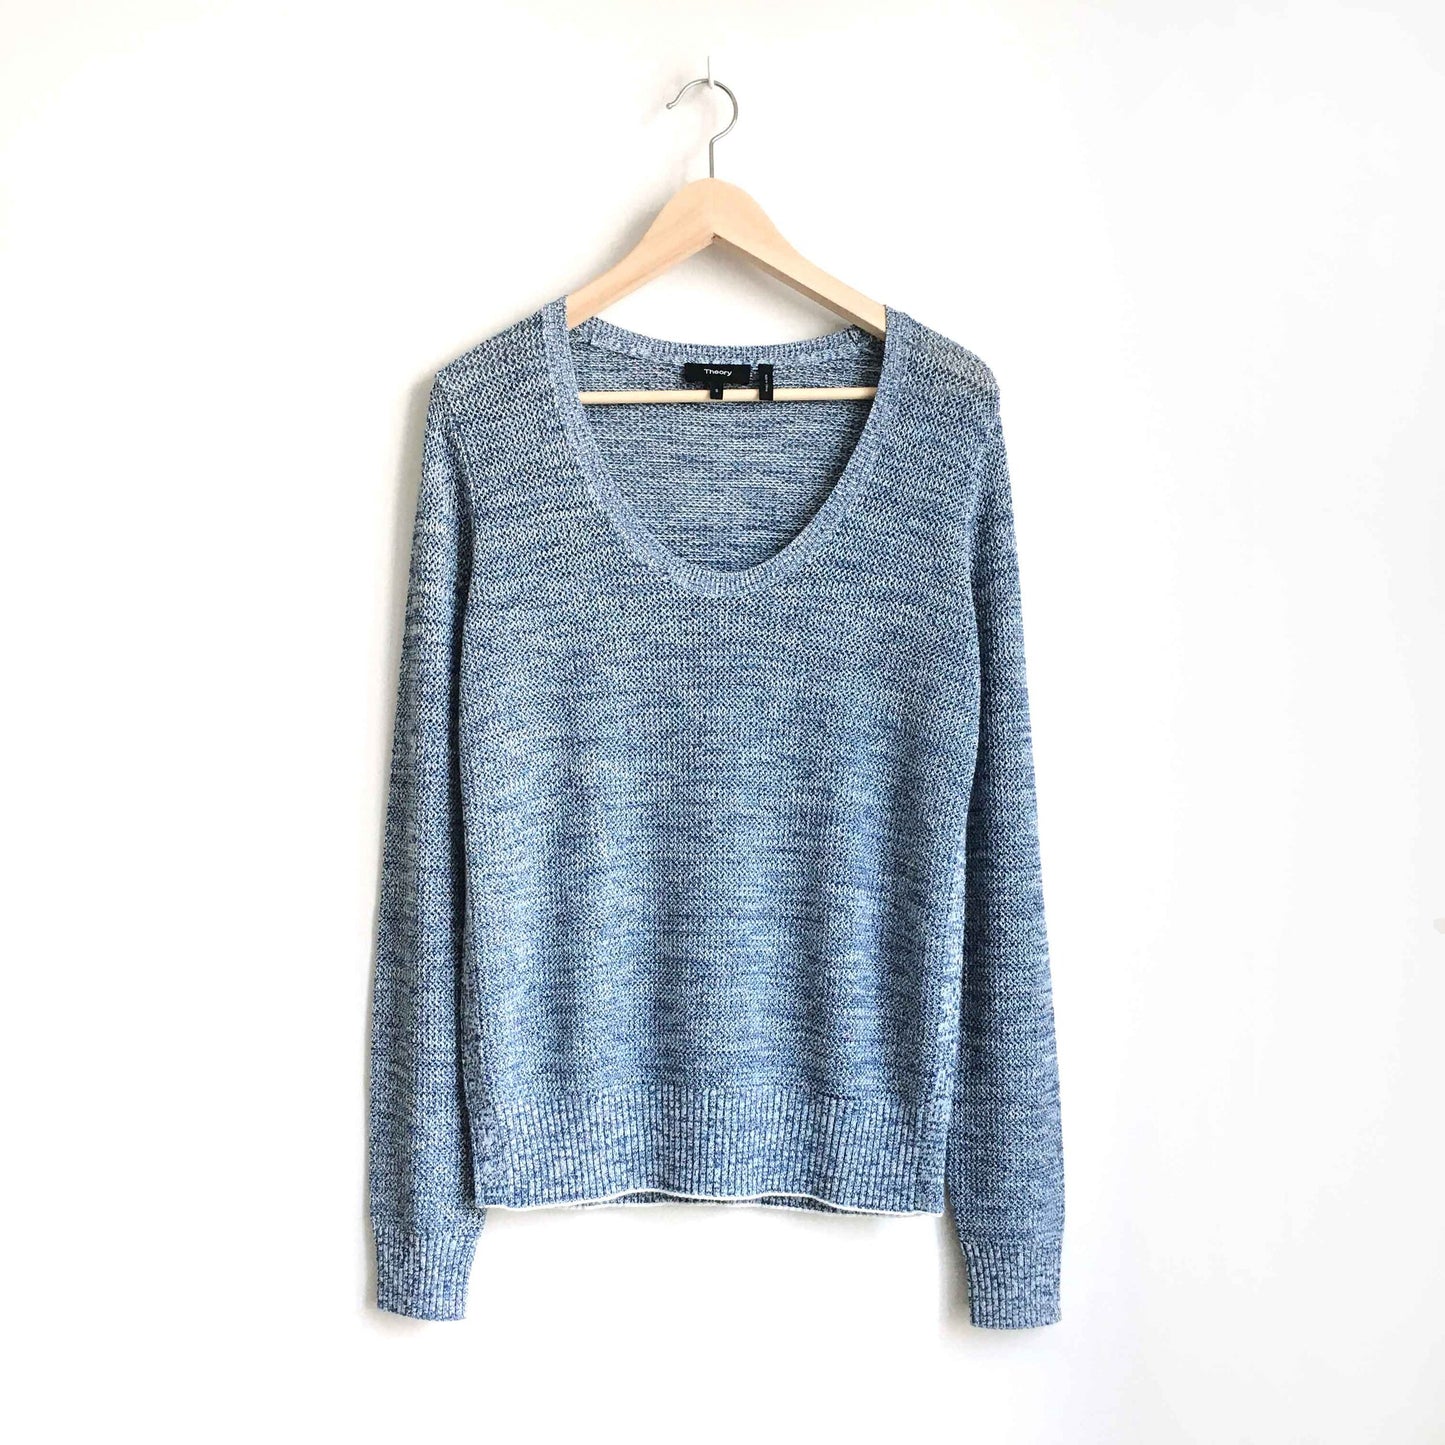 Theory Prosecco marled knit sweater - size Small